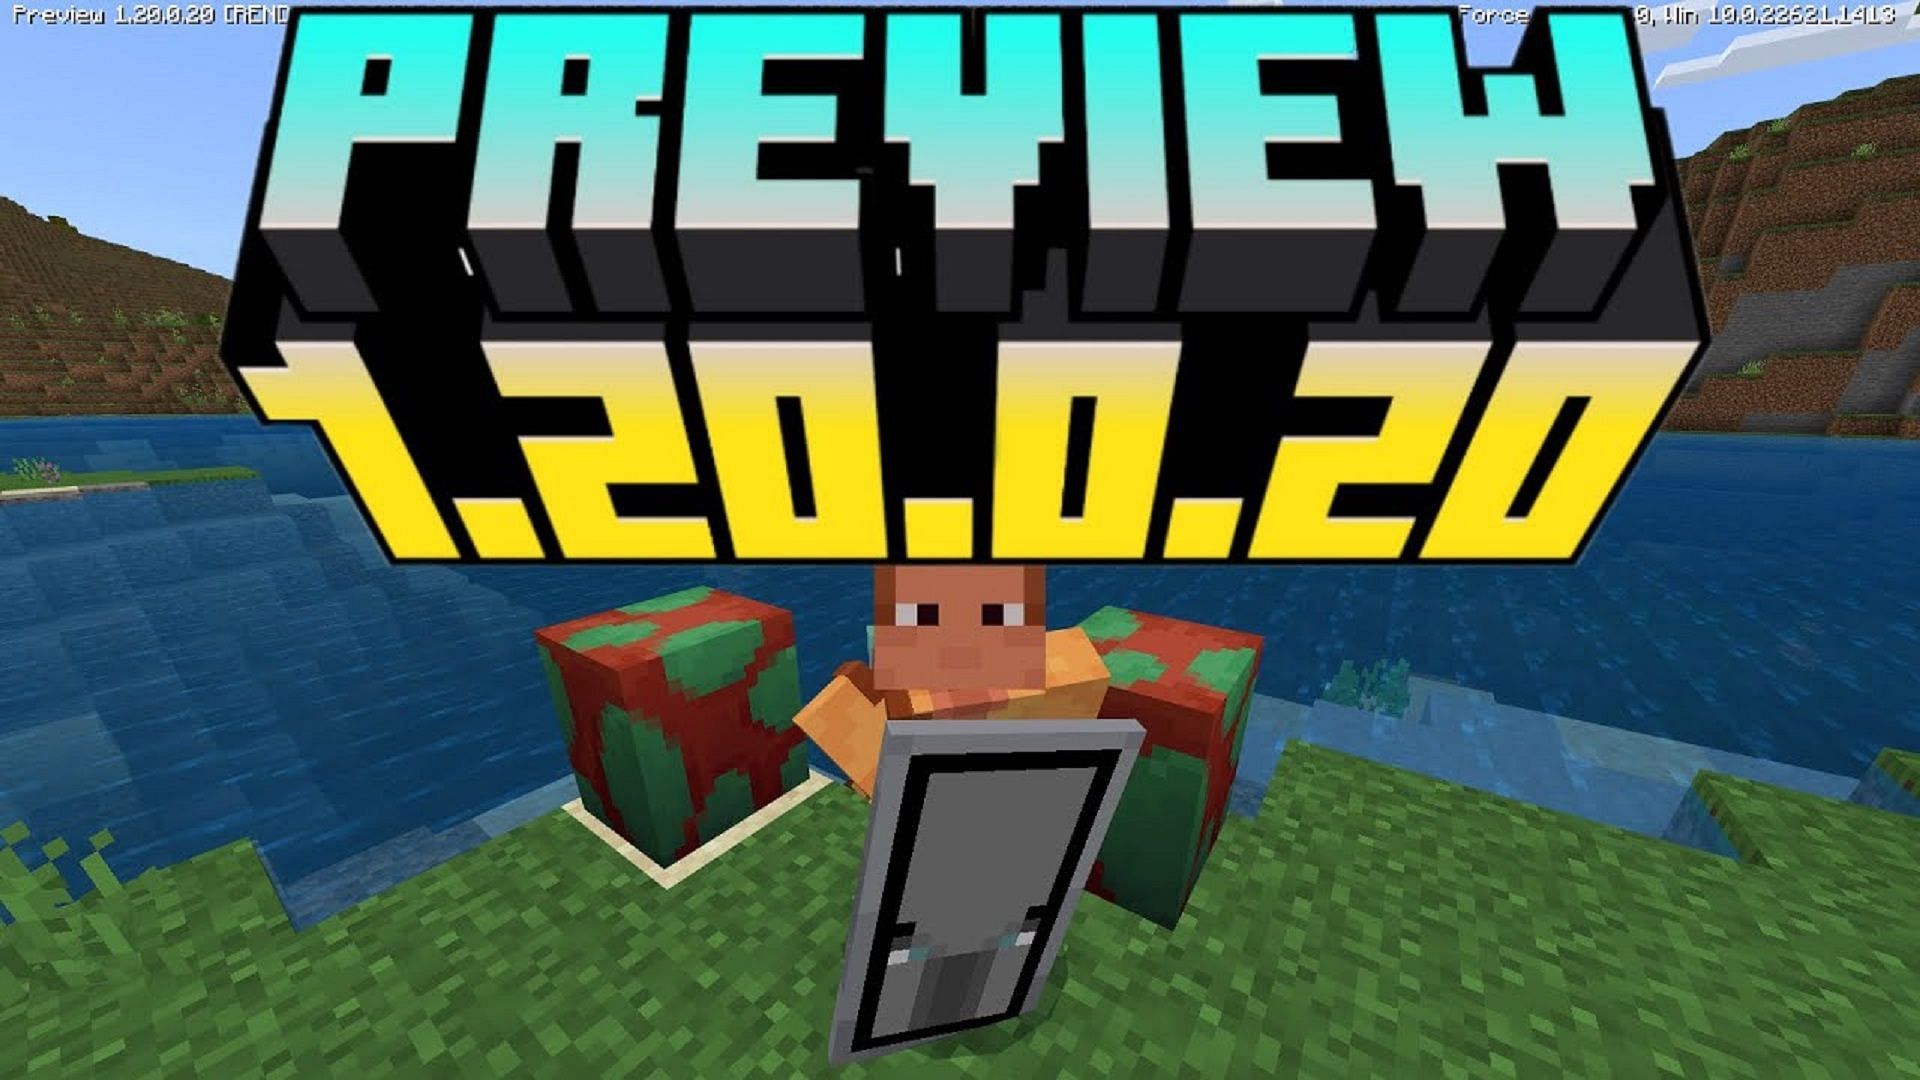 How to download Minecraft Preview 1.20.0.20